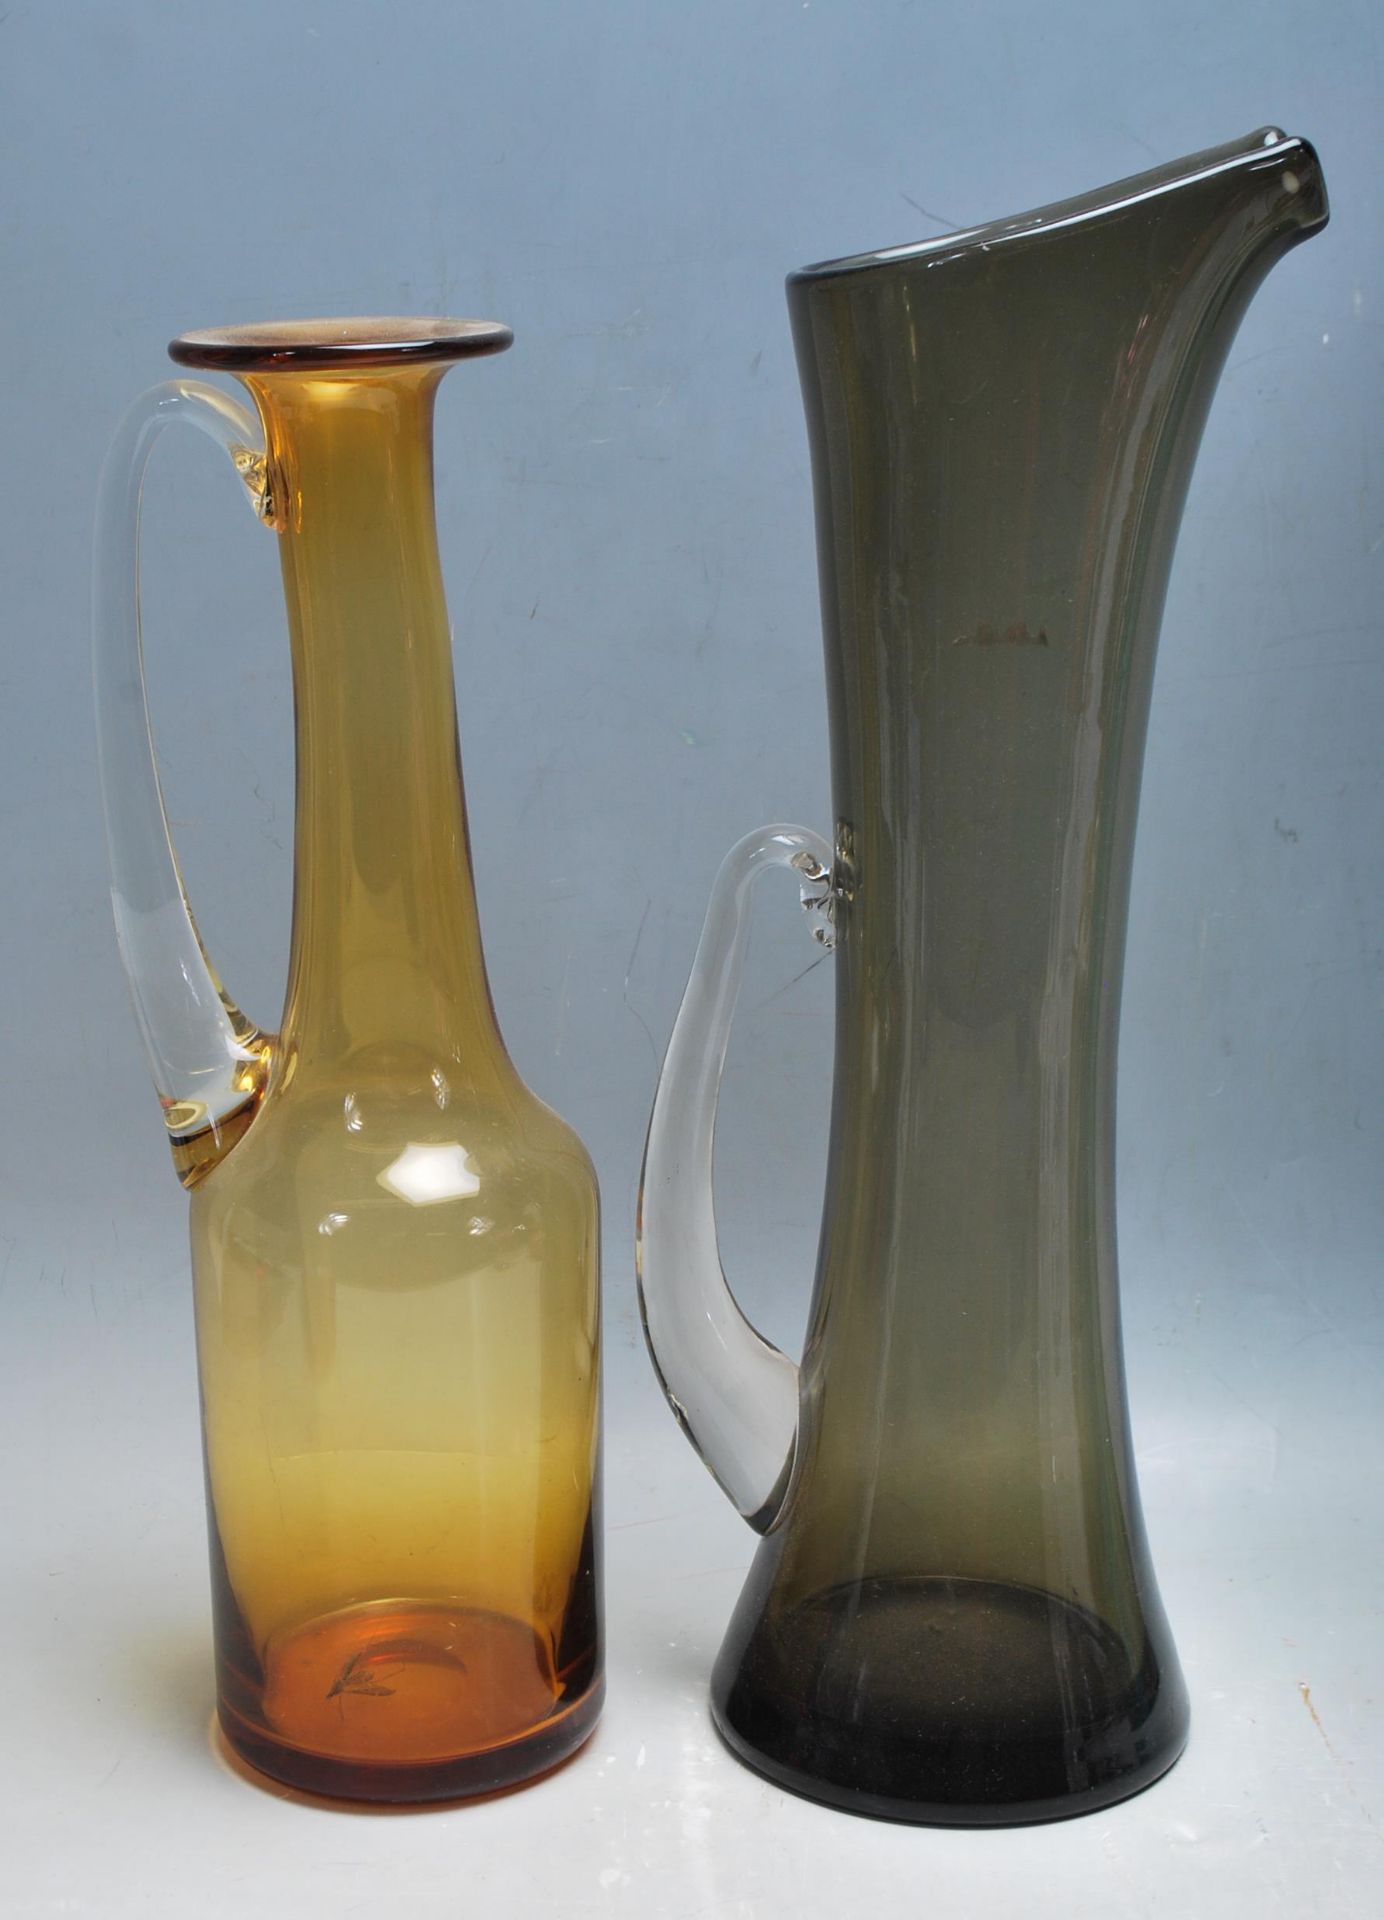 COLLECTION OF STUDIO ART GLASS VASES & JUGS - Image 5 of 6